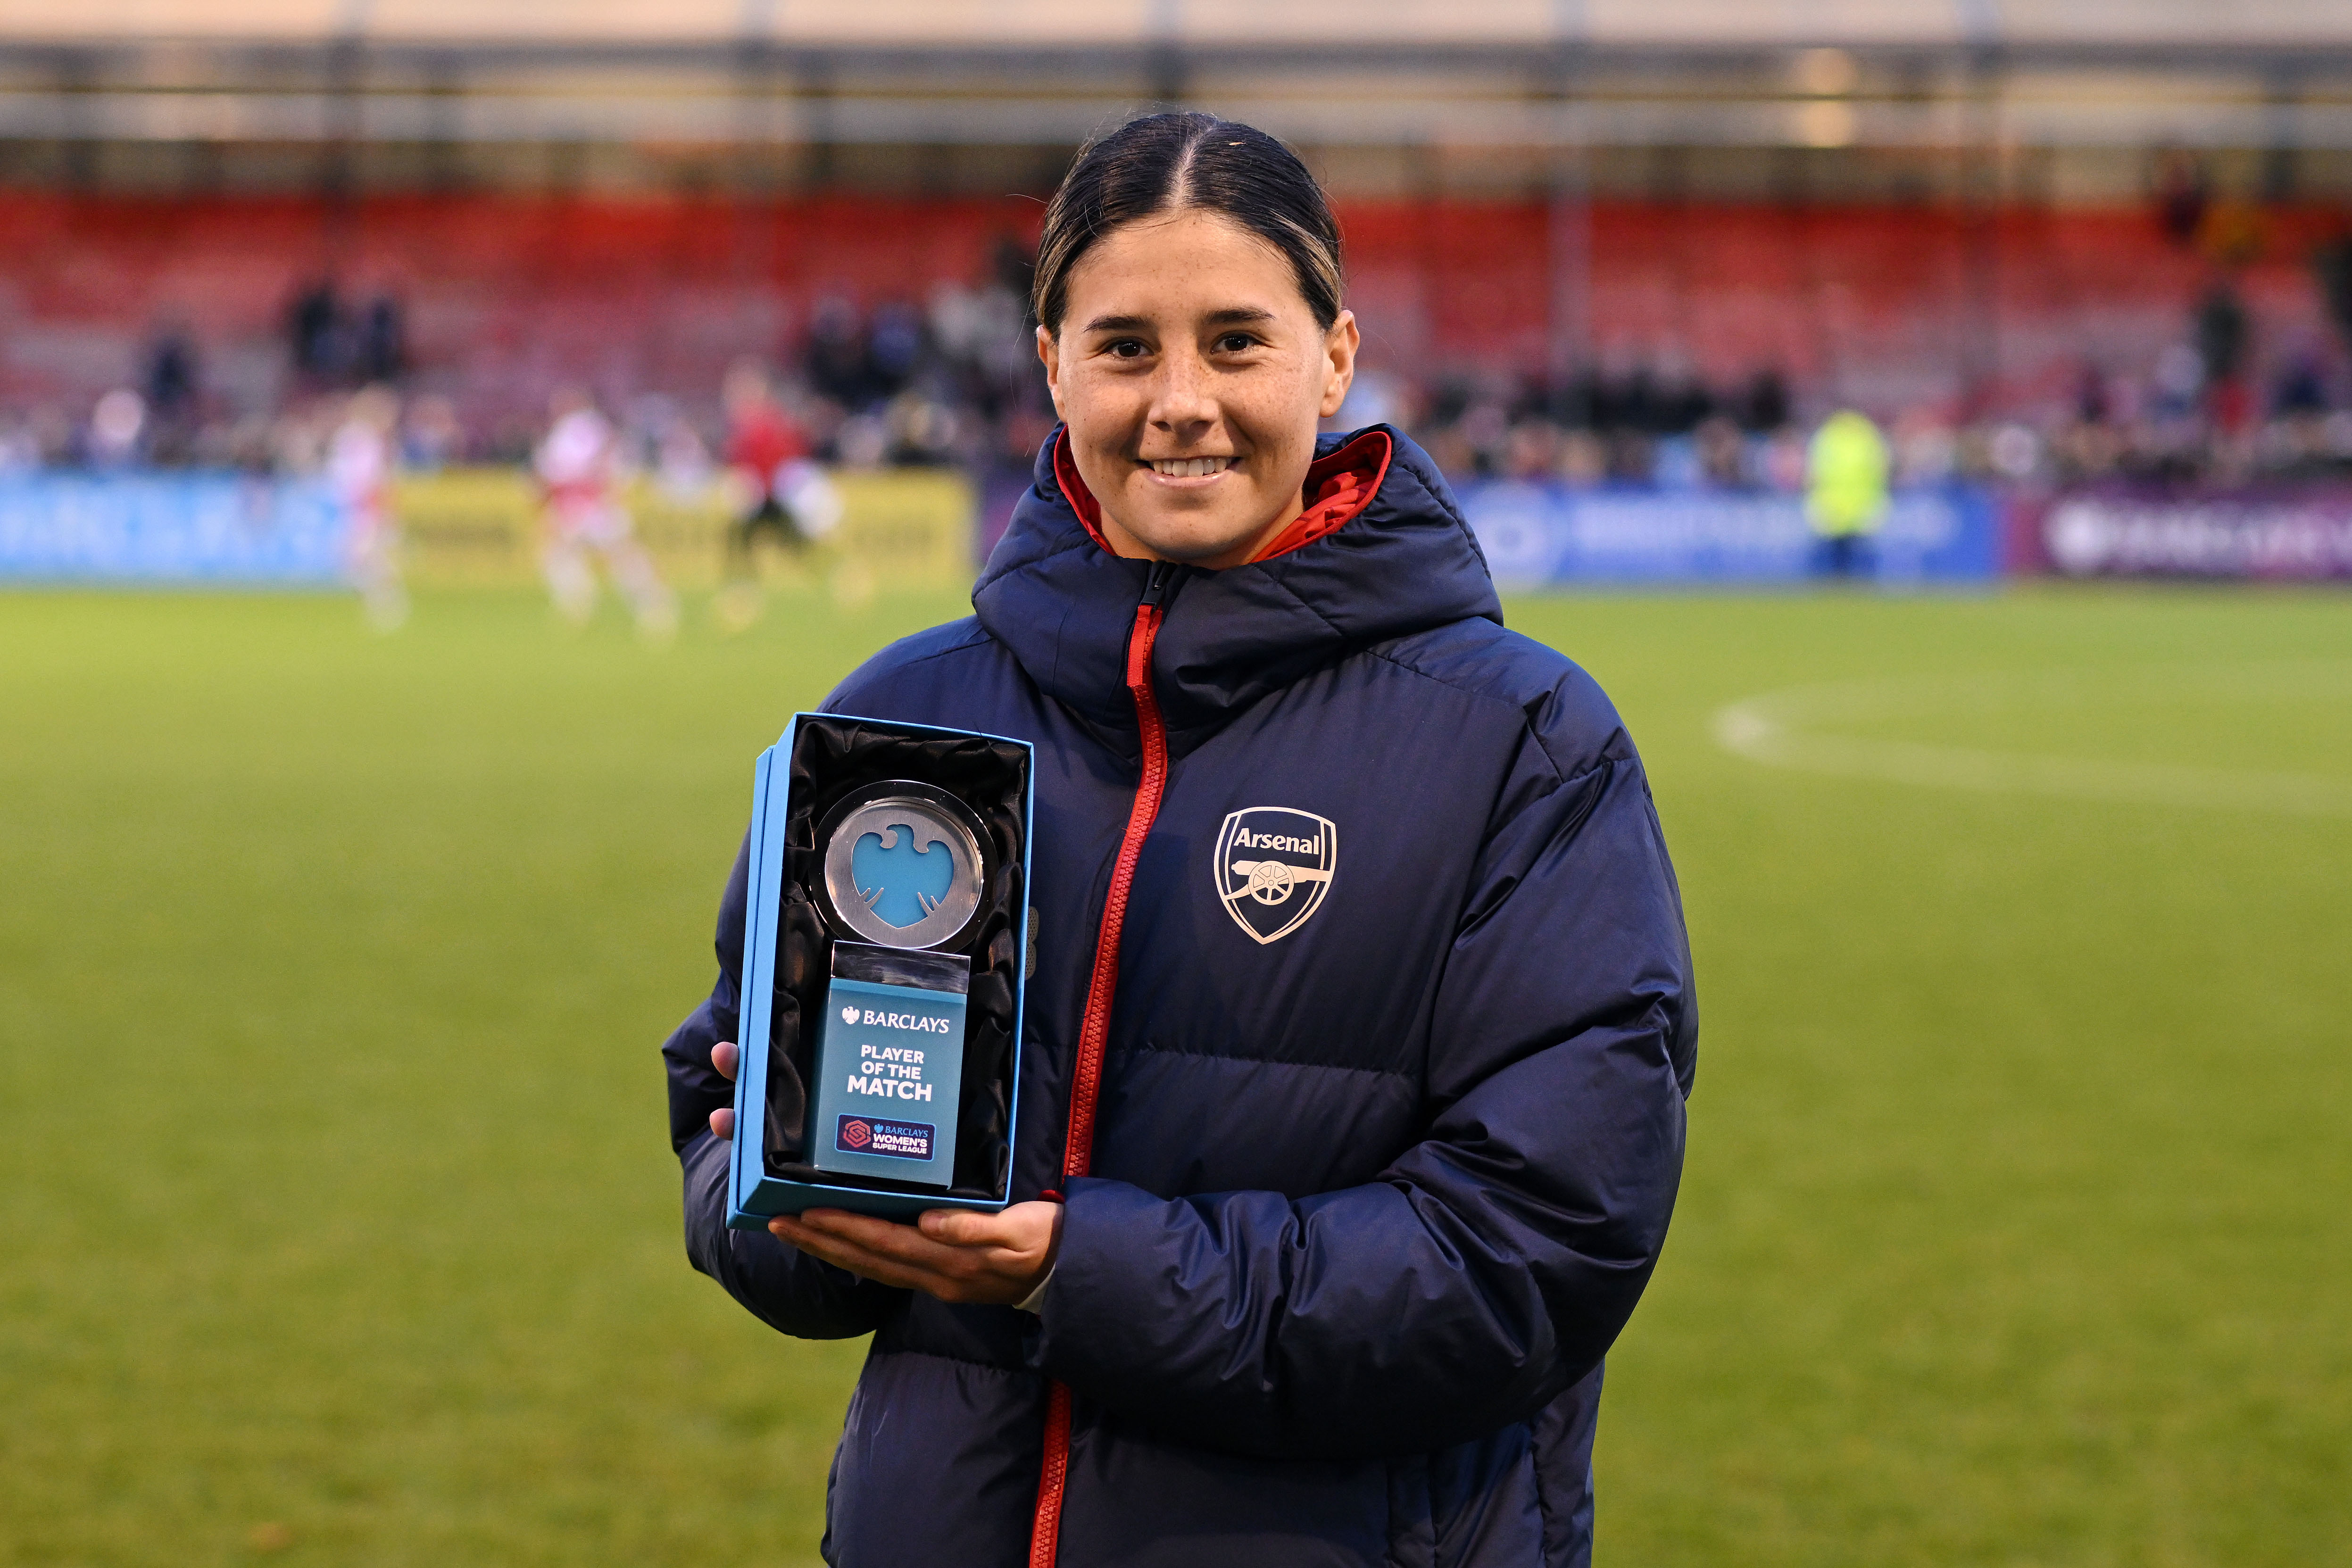 Kyra Cooney-Cross poses for a photo with the Barclay's Player of the Match Trophy following Arsenal's game against Brighton. (Photo: Arsenal Women/X)